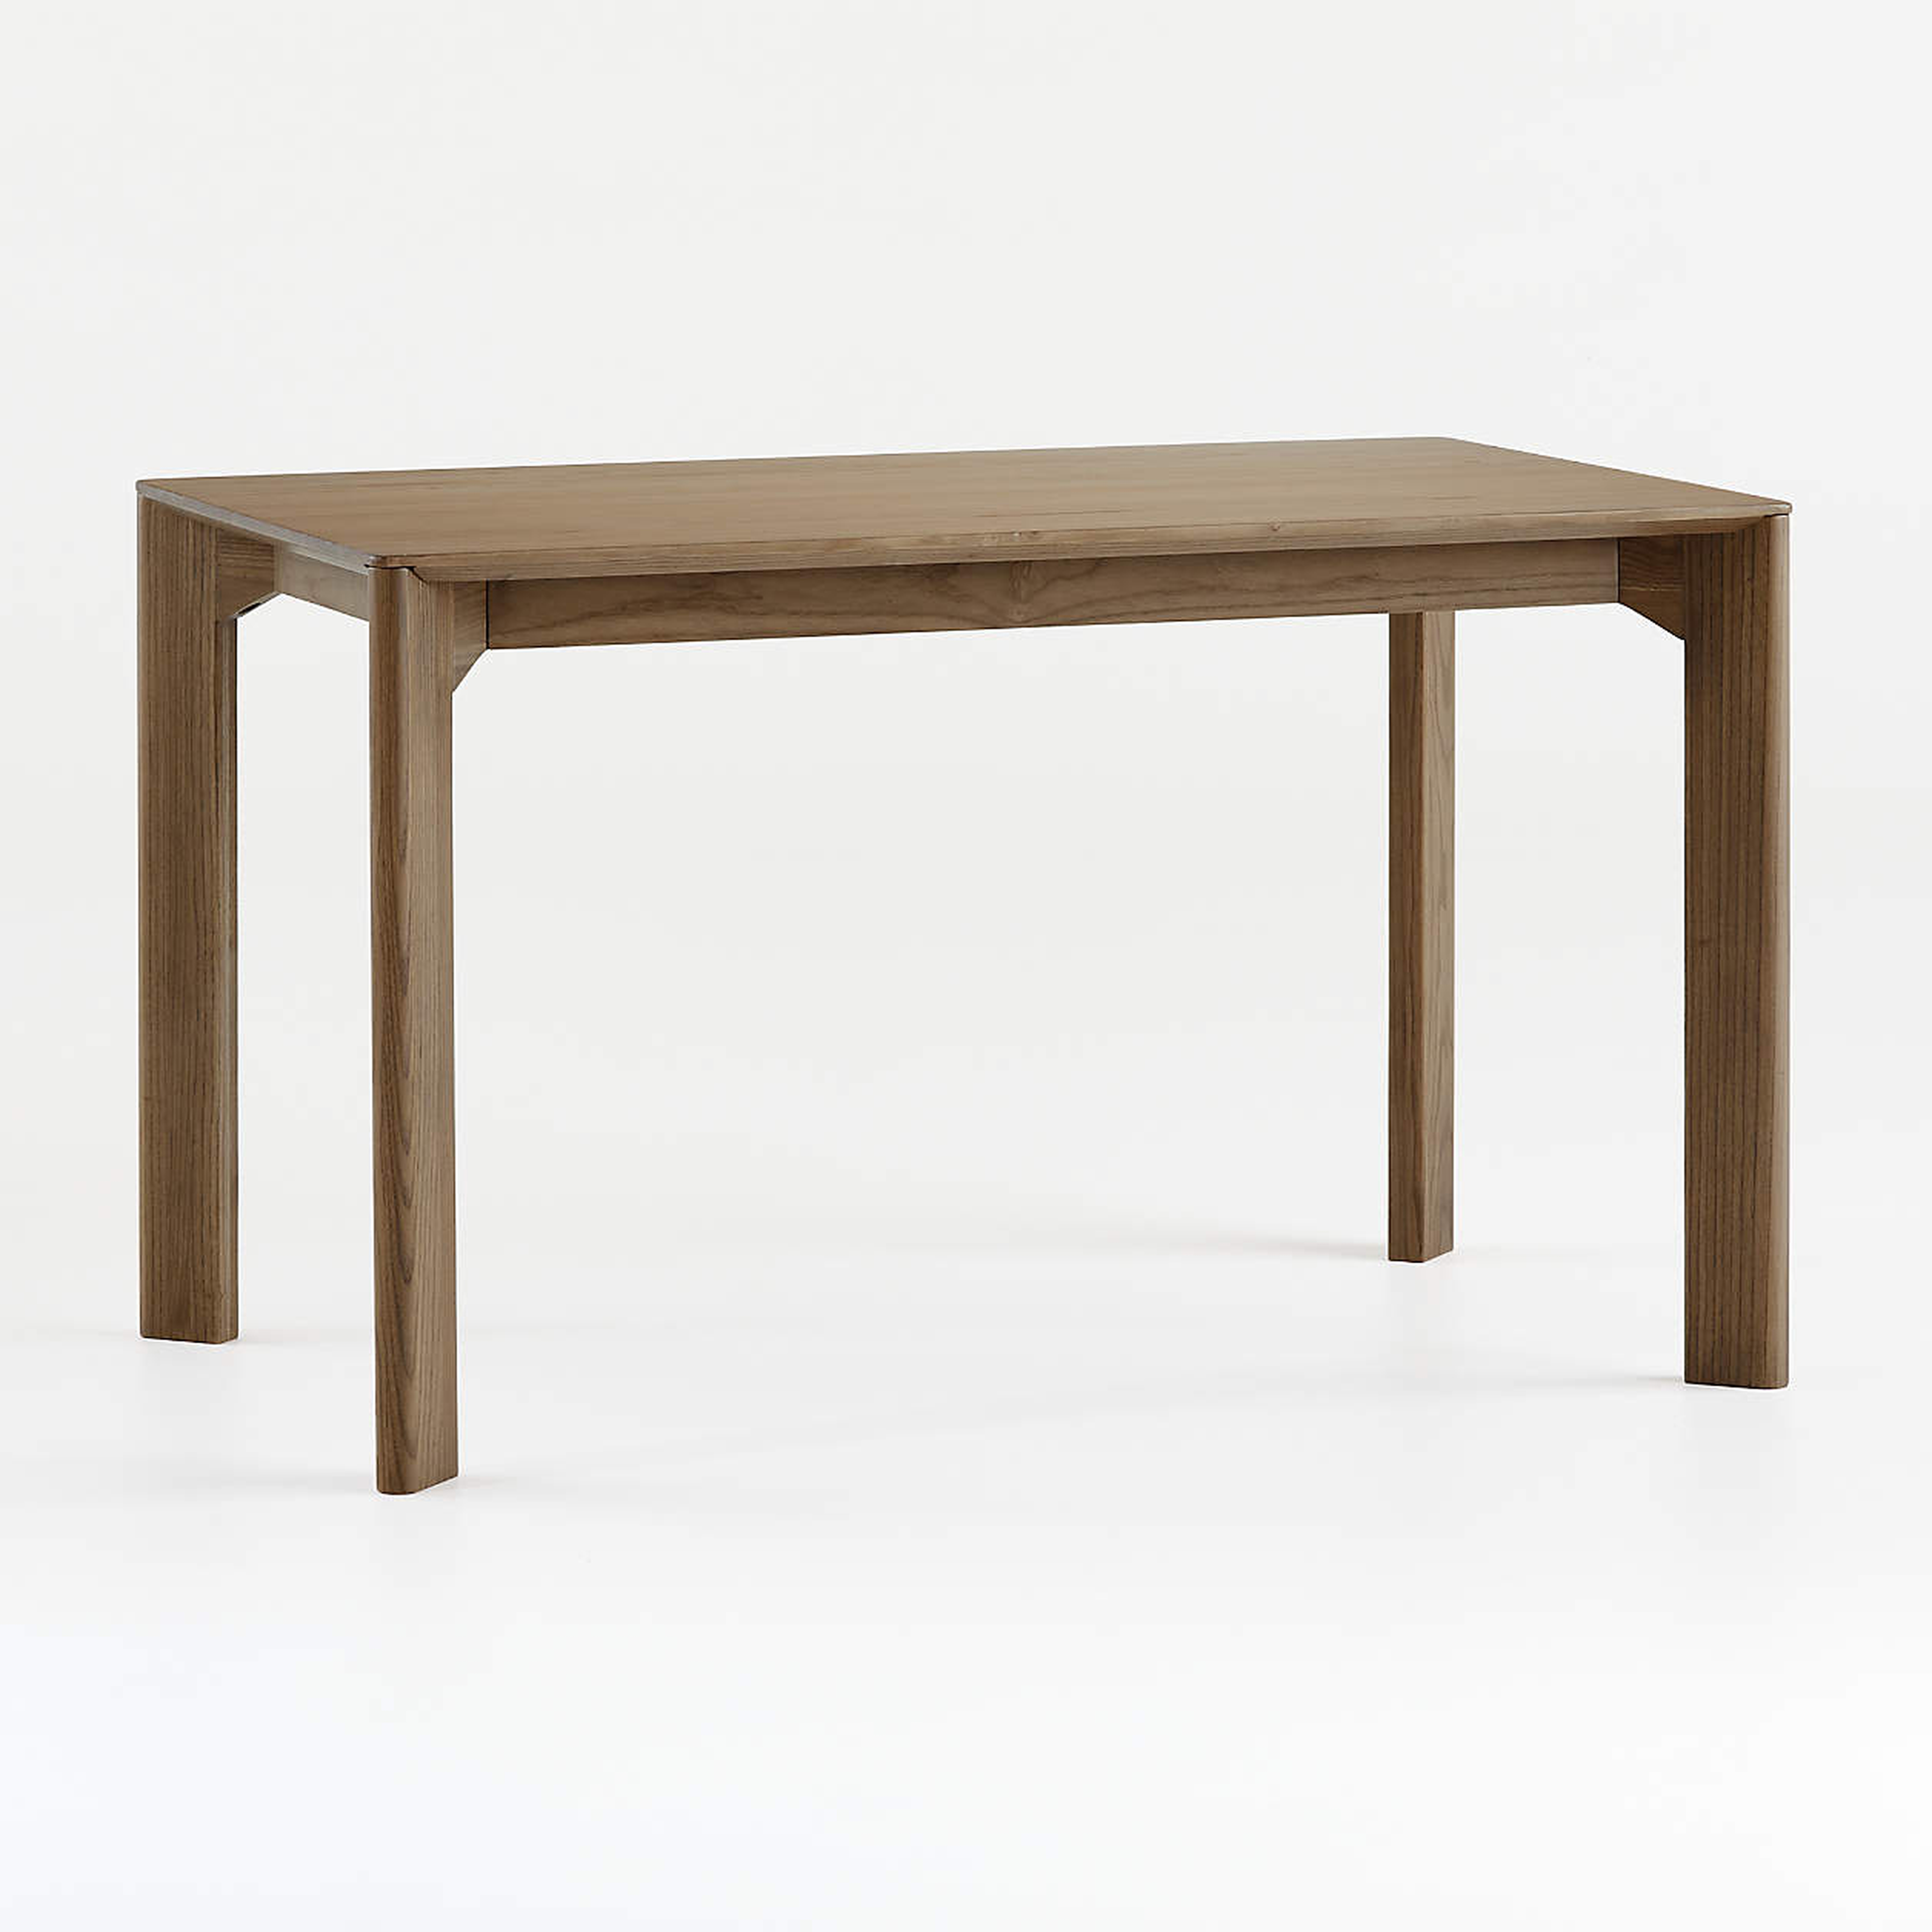 Ivy 50" Dining Table - Crate and Barrel